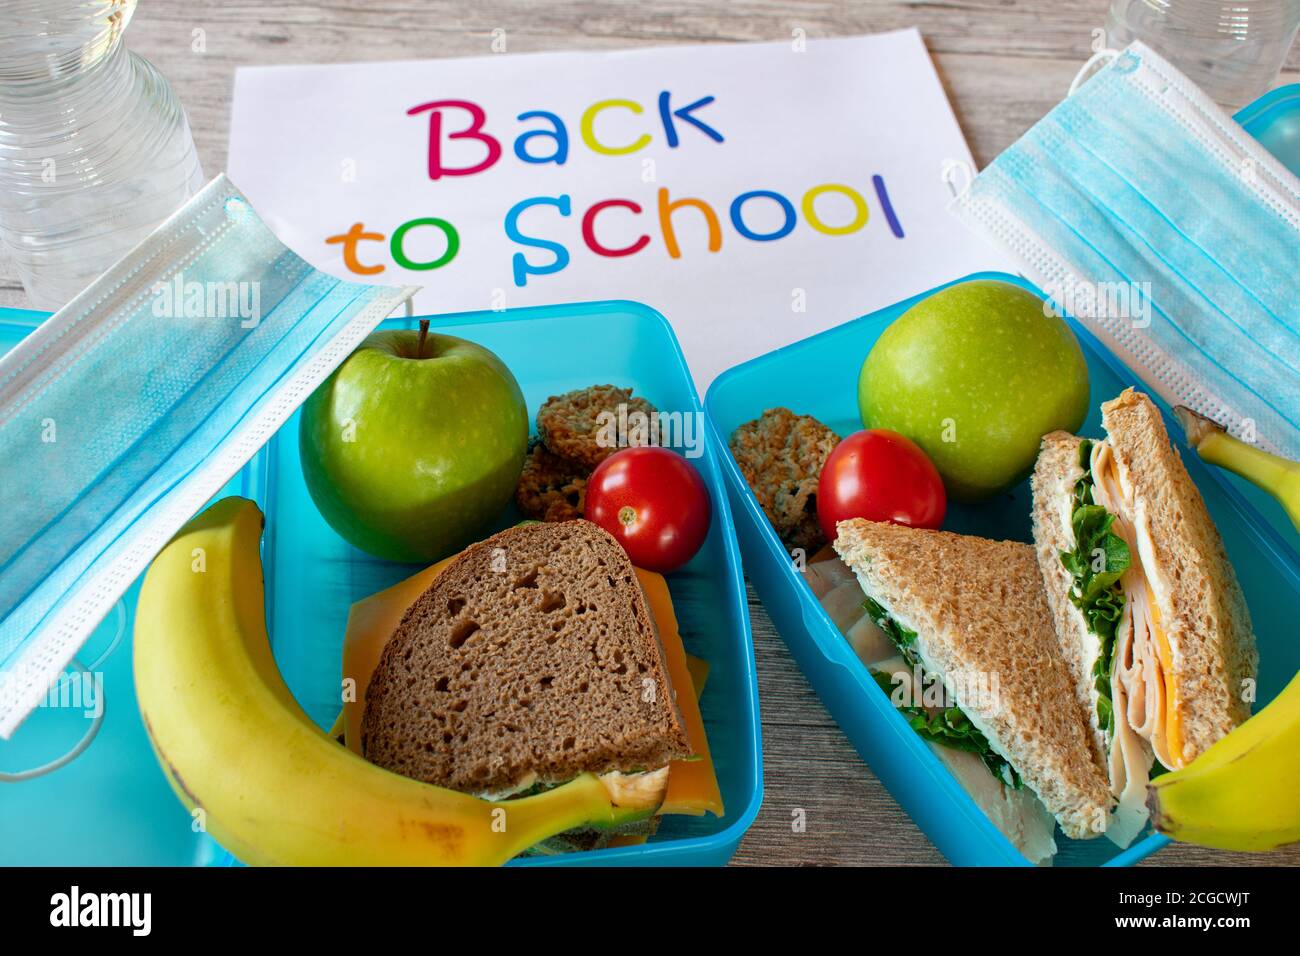 Back to school. lunch box with food and mouth protection mask Stock Photo